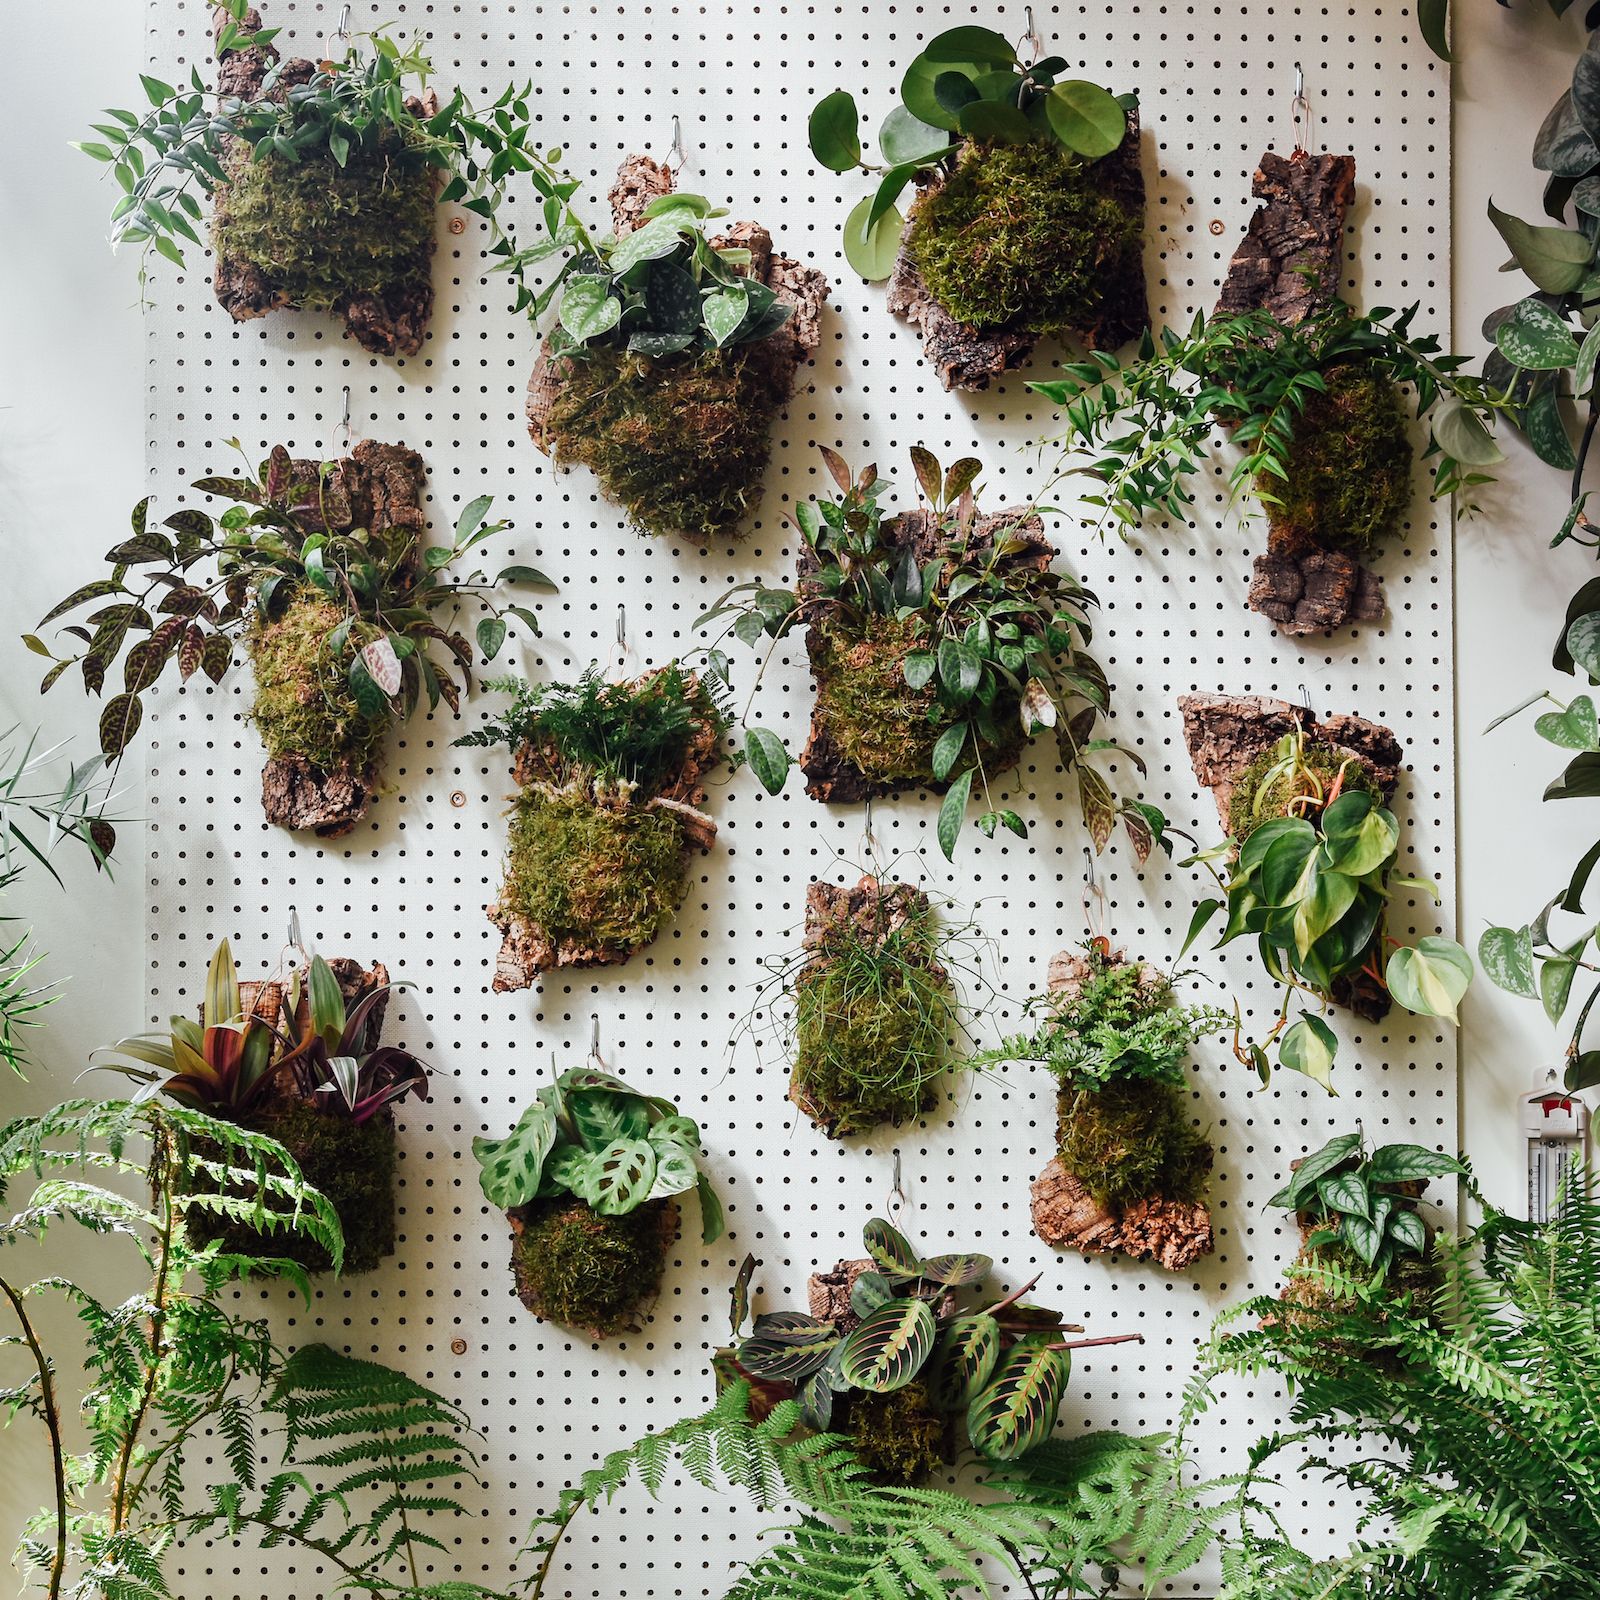 Creative Ways to‌ Bring Nature Indoors with DIY Projects